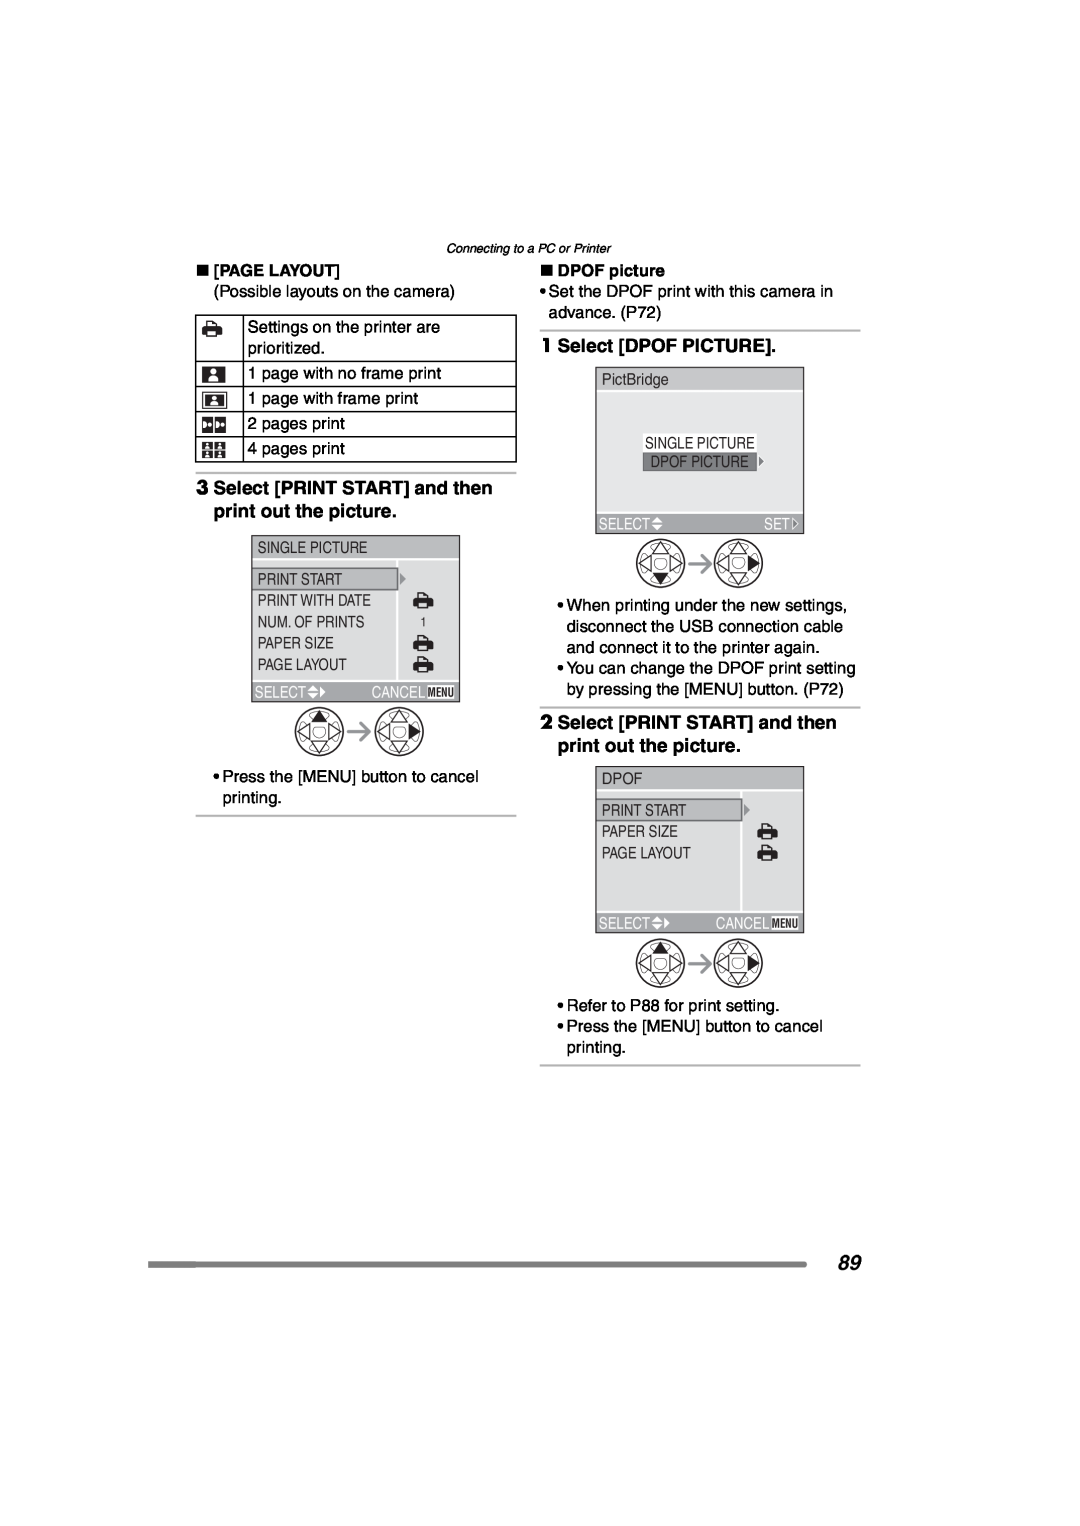 Panasonic DMCFX7 Select PRINT START and then print out the picture, Select DPOF PICTURE, ∫ Page Layout, ∫ DPOF picture 